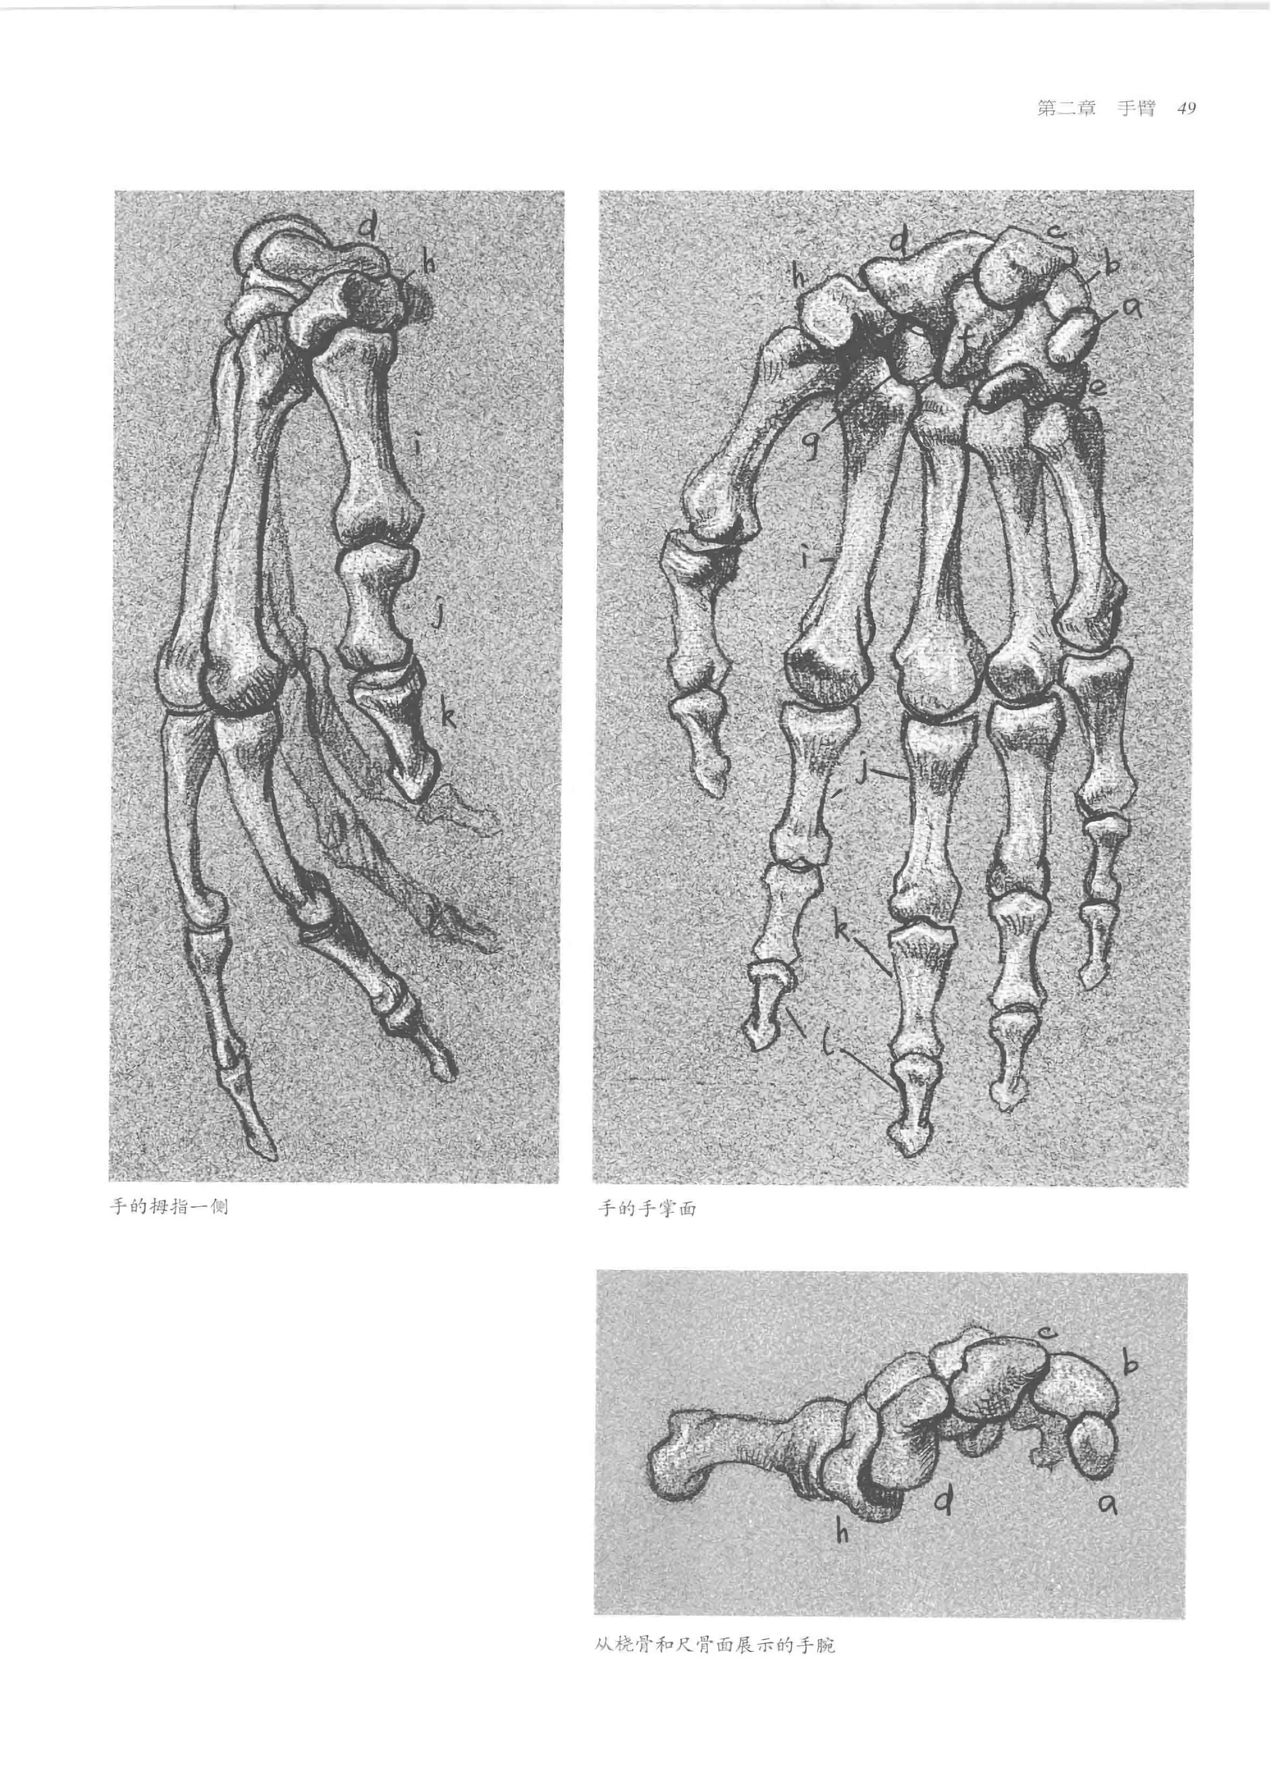 Anatomy-A Complete Guide for Artists - Joseph Sheppard [Chinese] 49